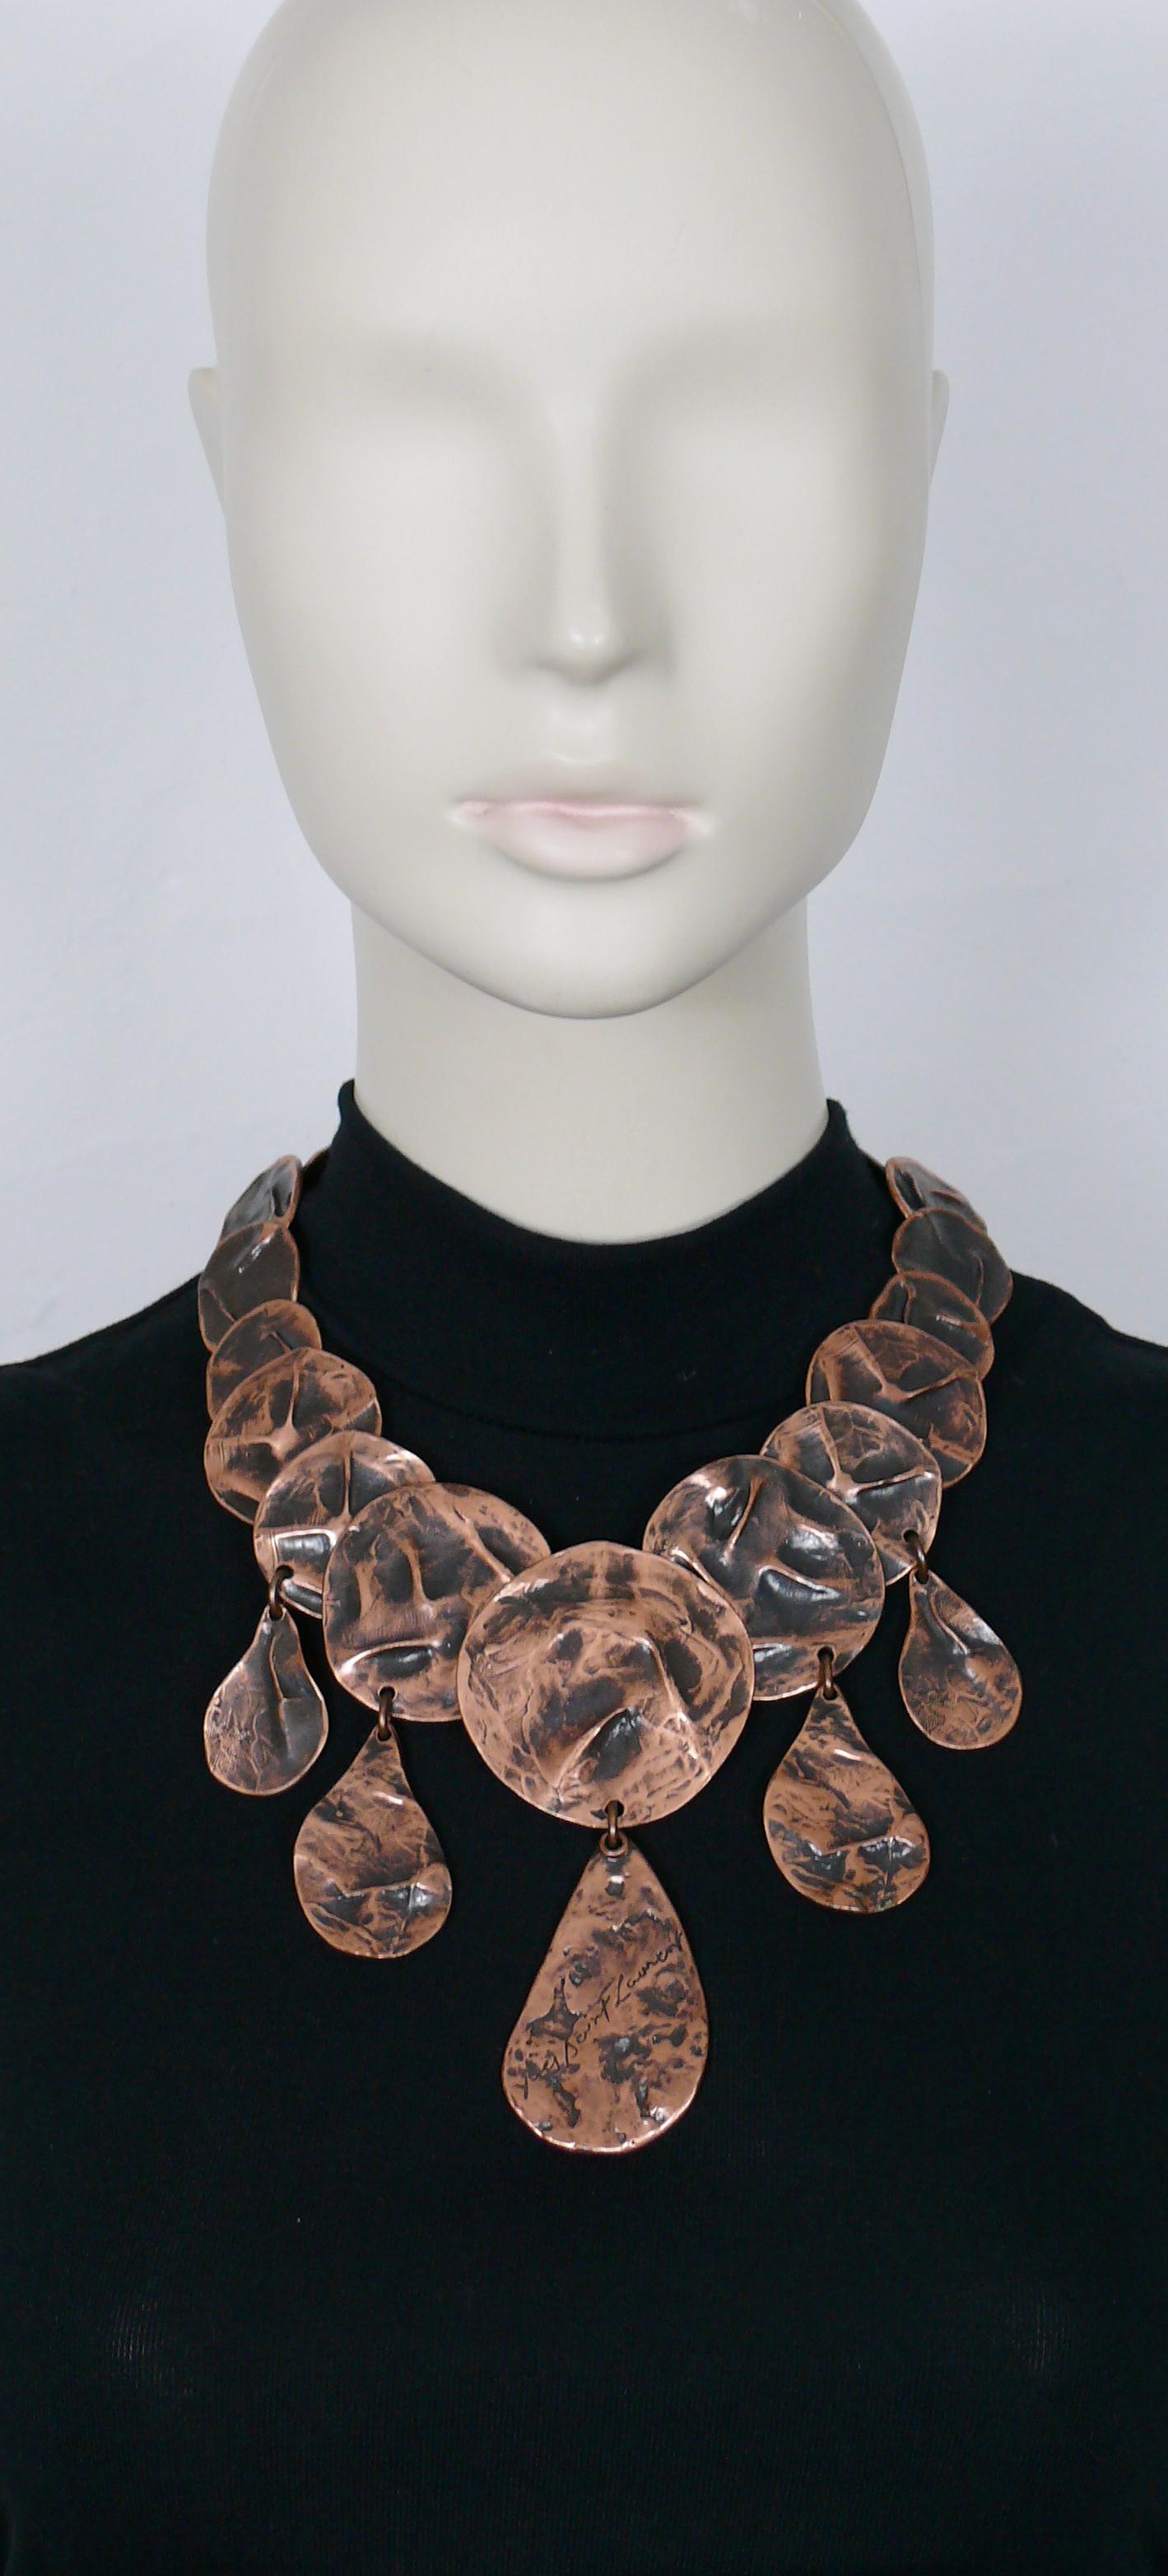 YVES SAINT LAURENT vintage rare opulent copper toned articulated necklace featuring crumpled disc links and drops with the central drop embossed with YVES SAINT LAURENT cursive signature.

Adjustable lobster spring closure.
Extension chain and clasp